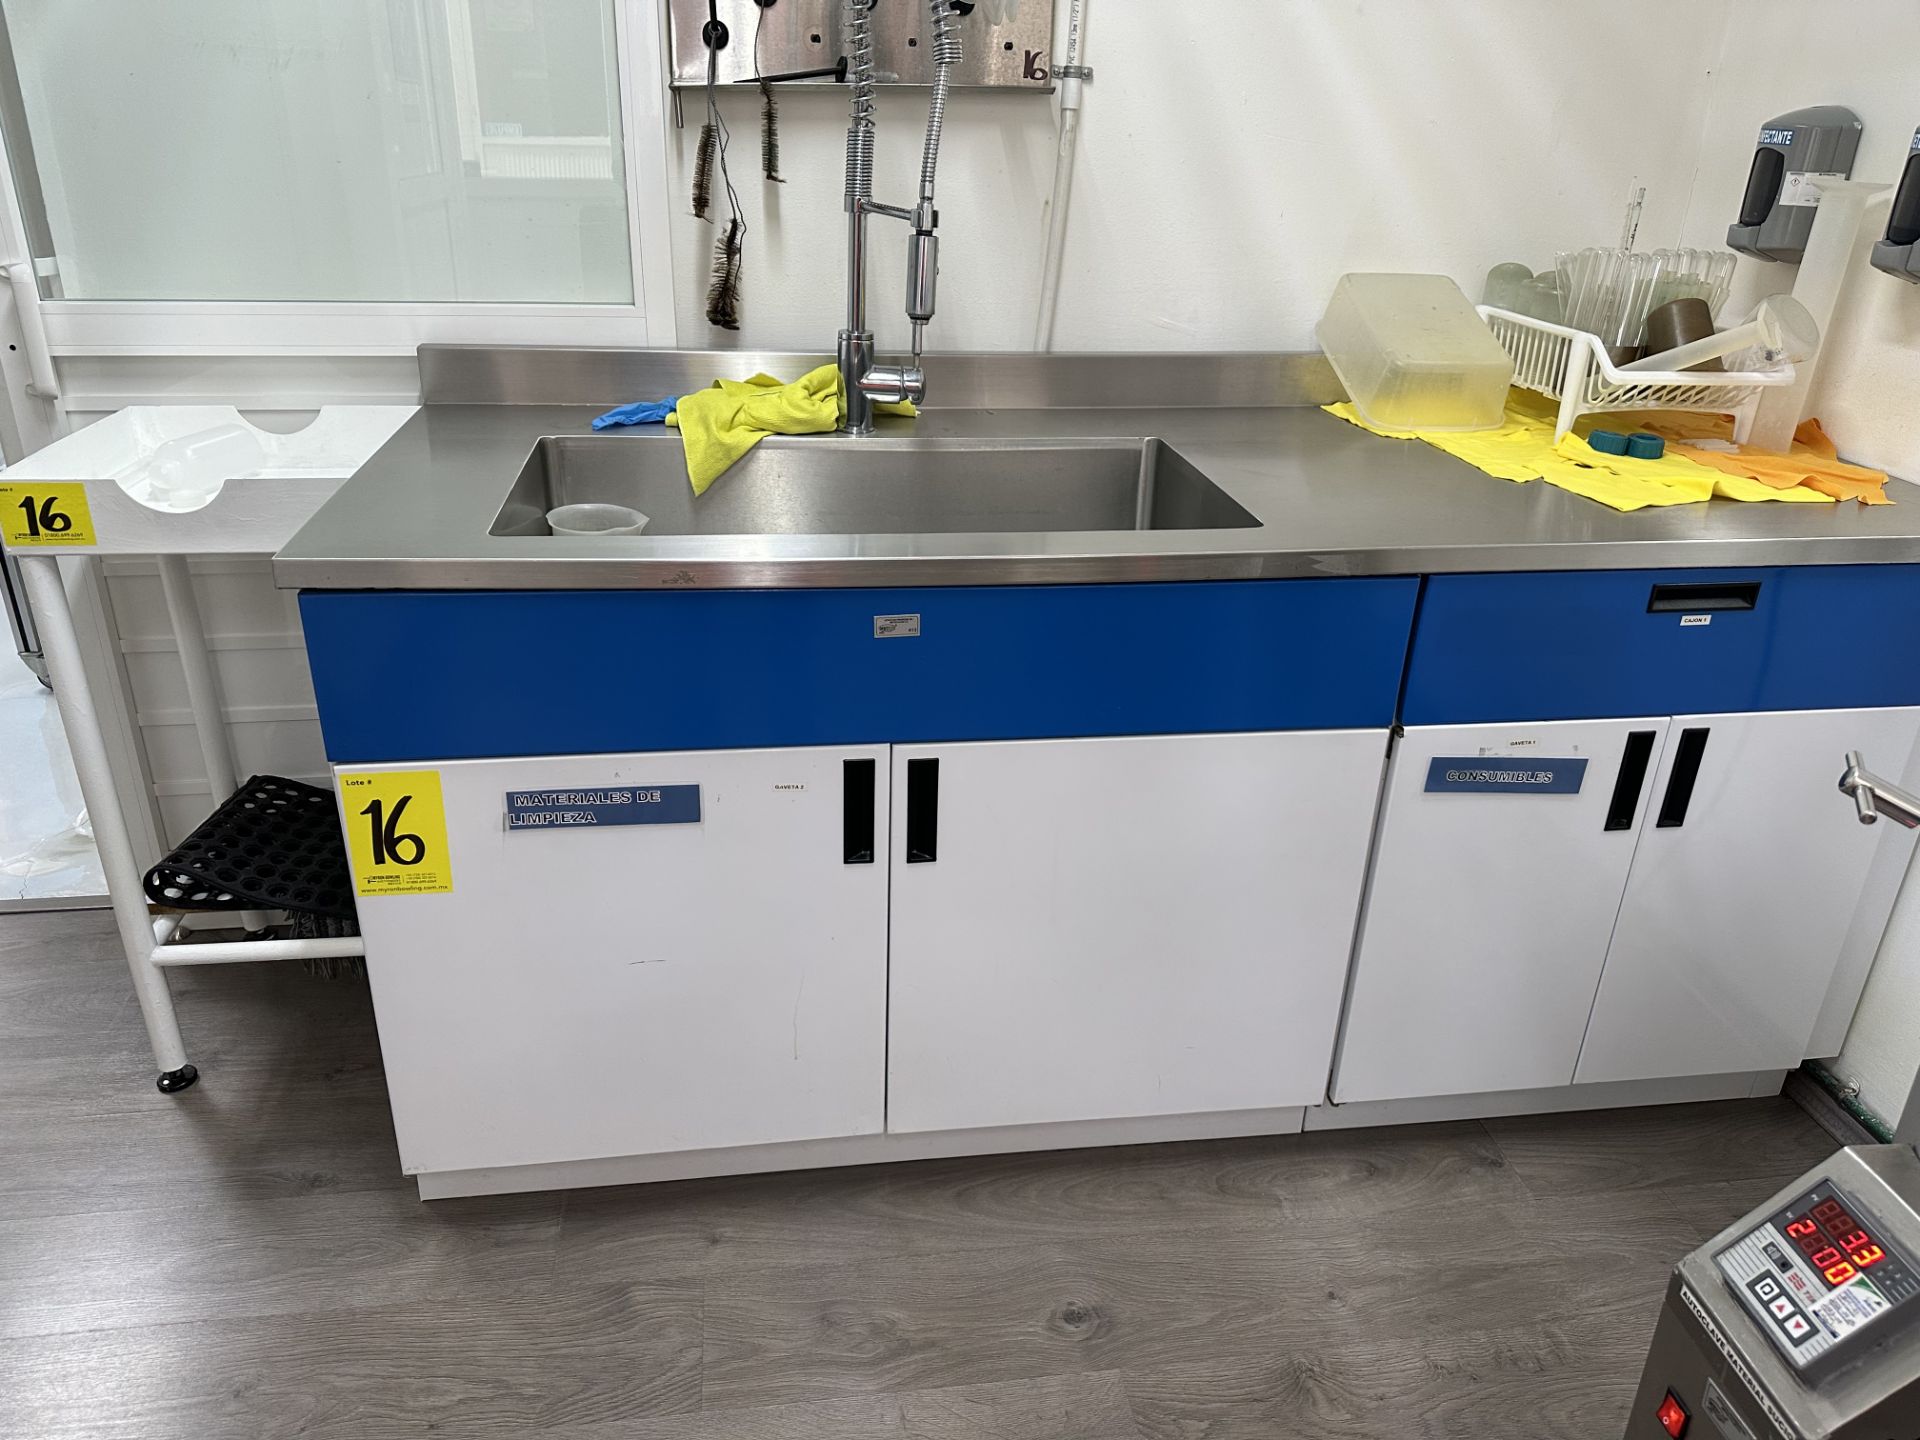 1 laboratory cabinet with stainless steel cover and sink, measures approximately 2.0 x 0.76 x 0.90